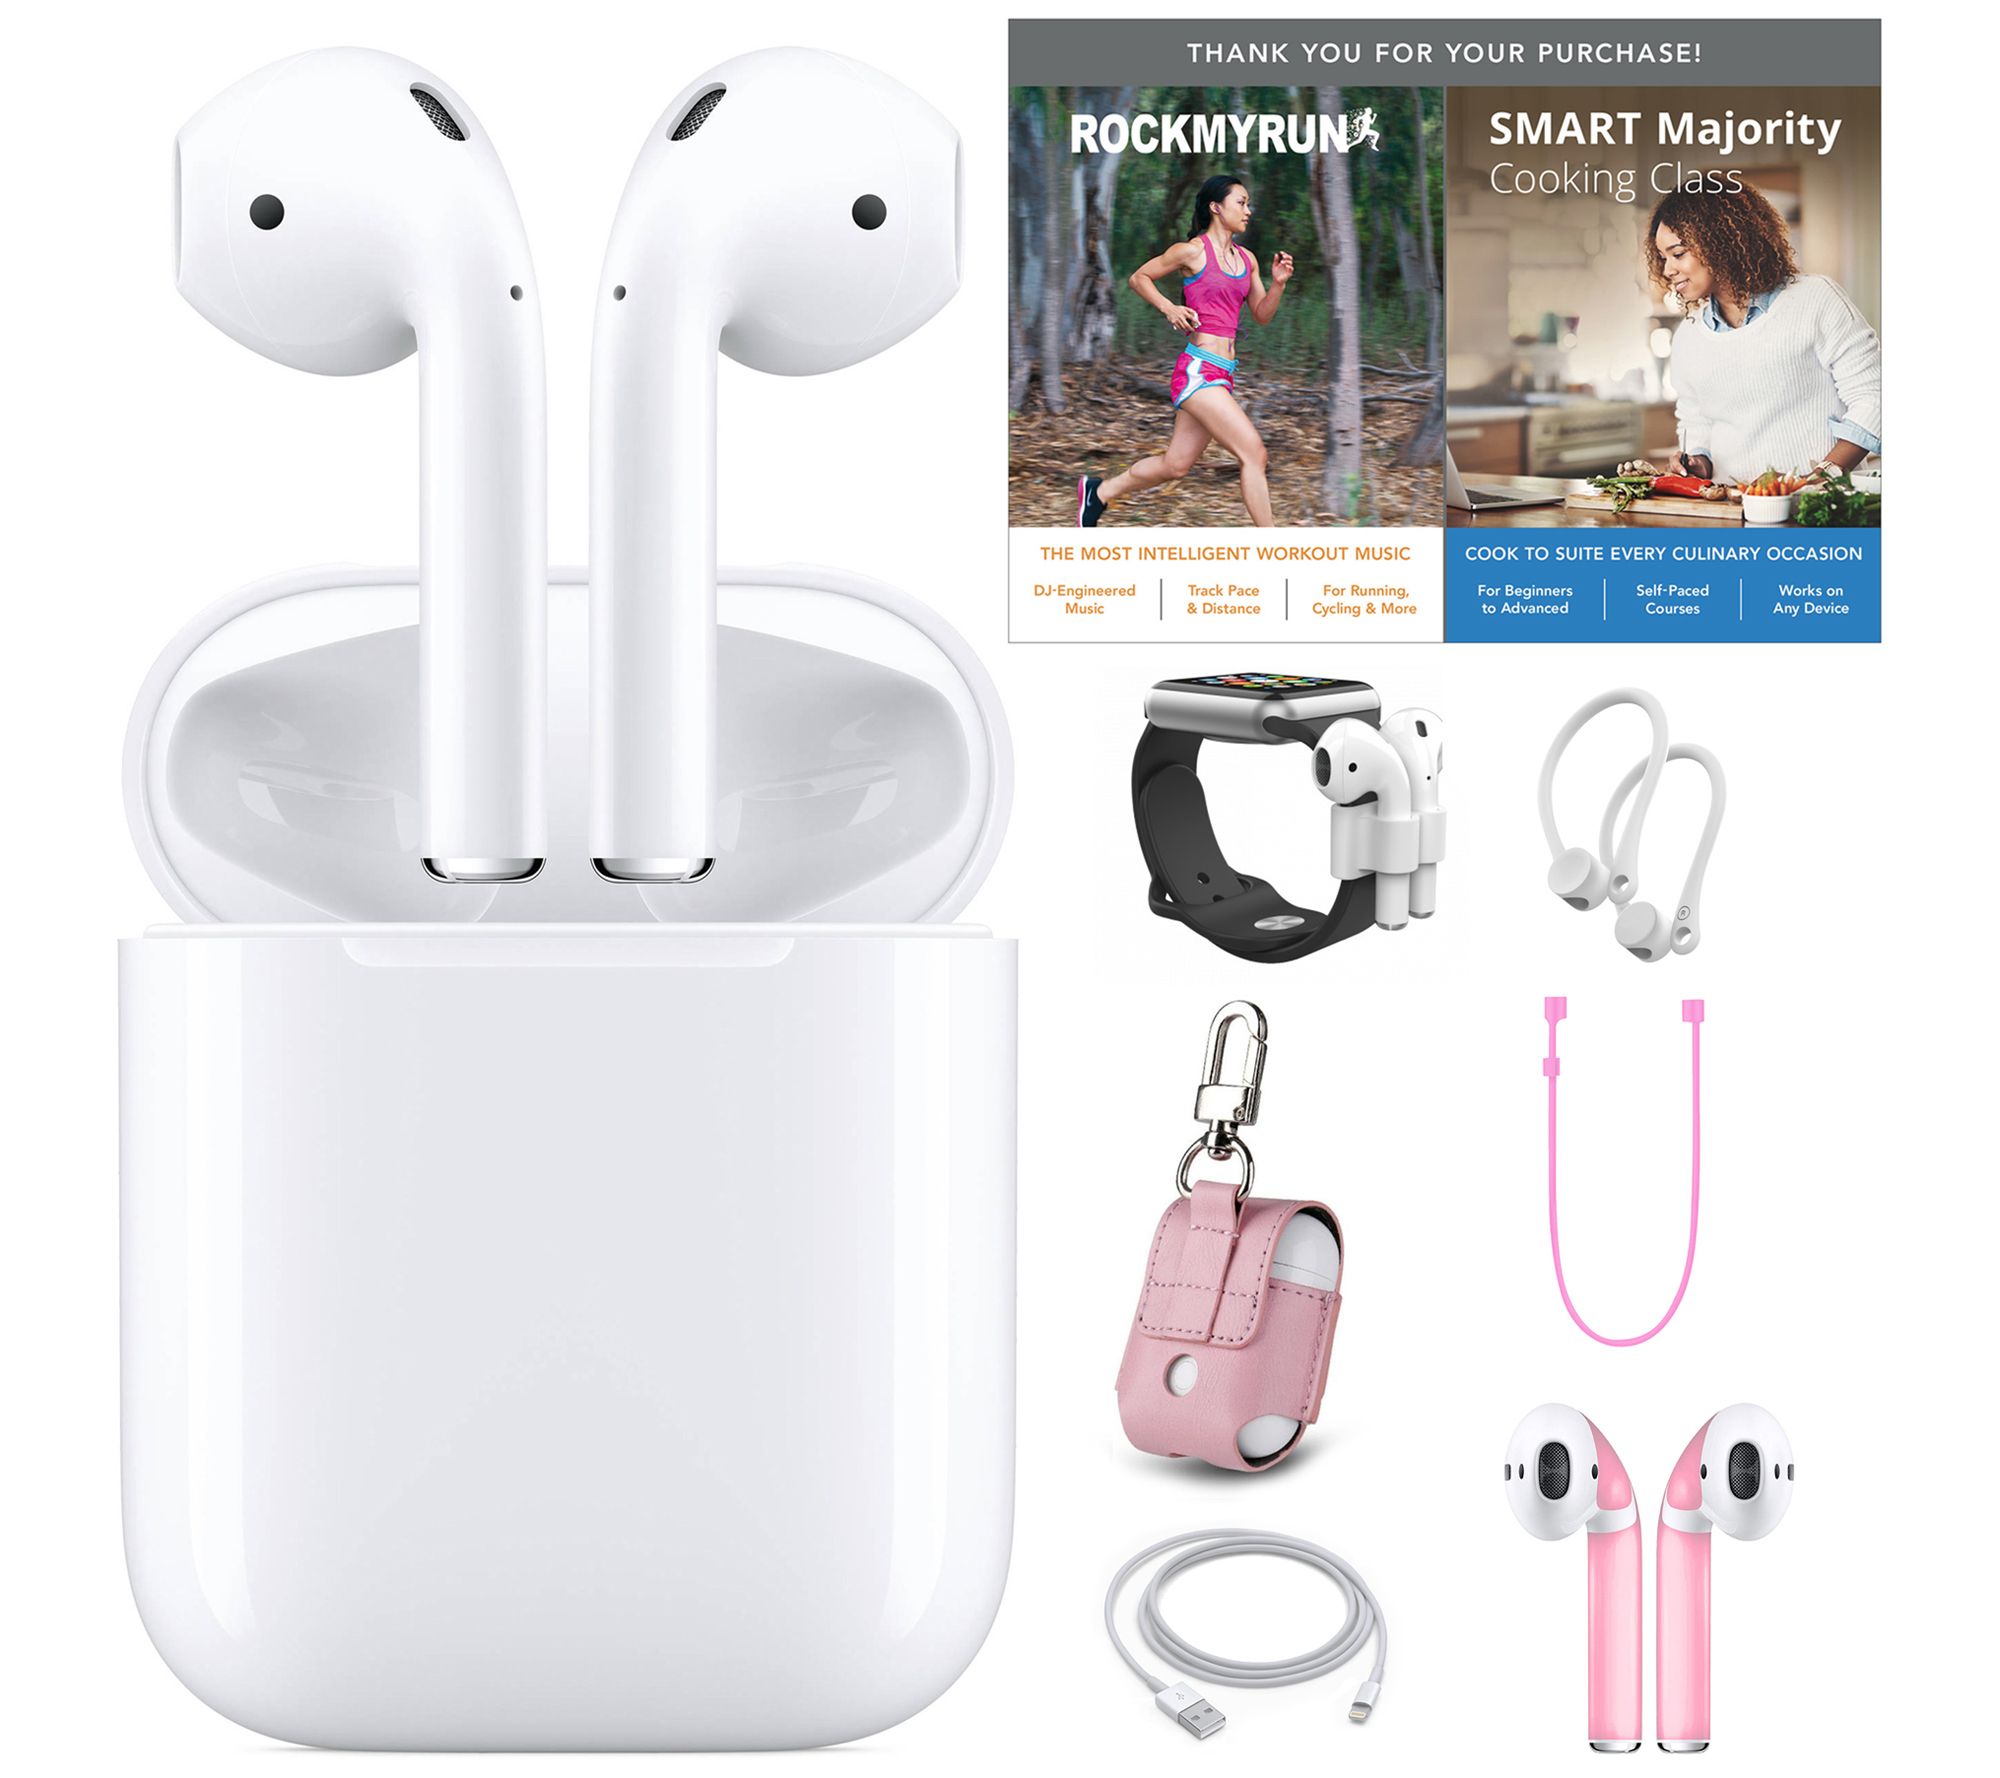 Apple AirPods 2nd Generation with Accessories & Voucher - QVC.com